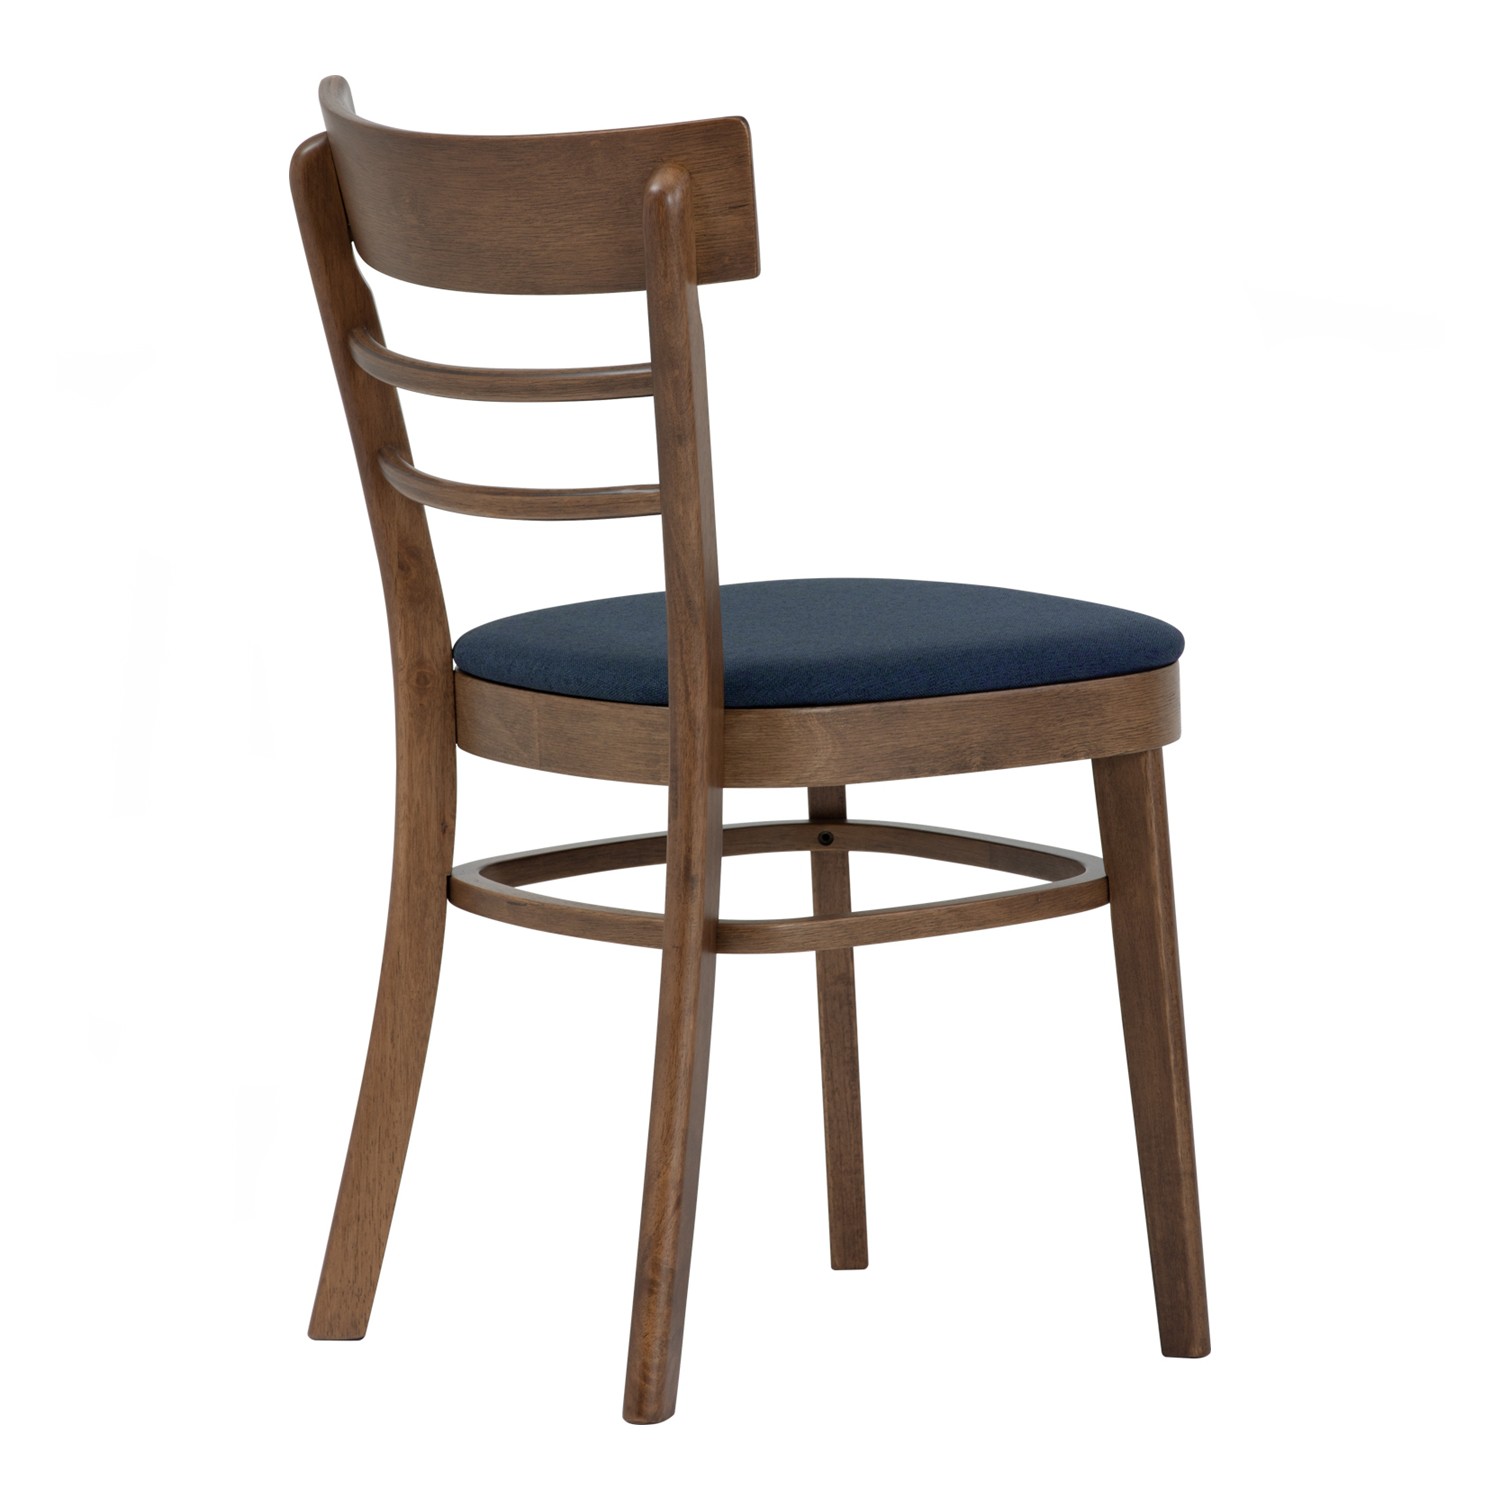 NAMID DINING CHAIR 109/6367